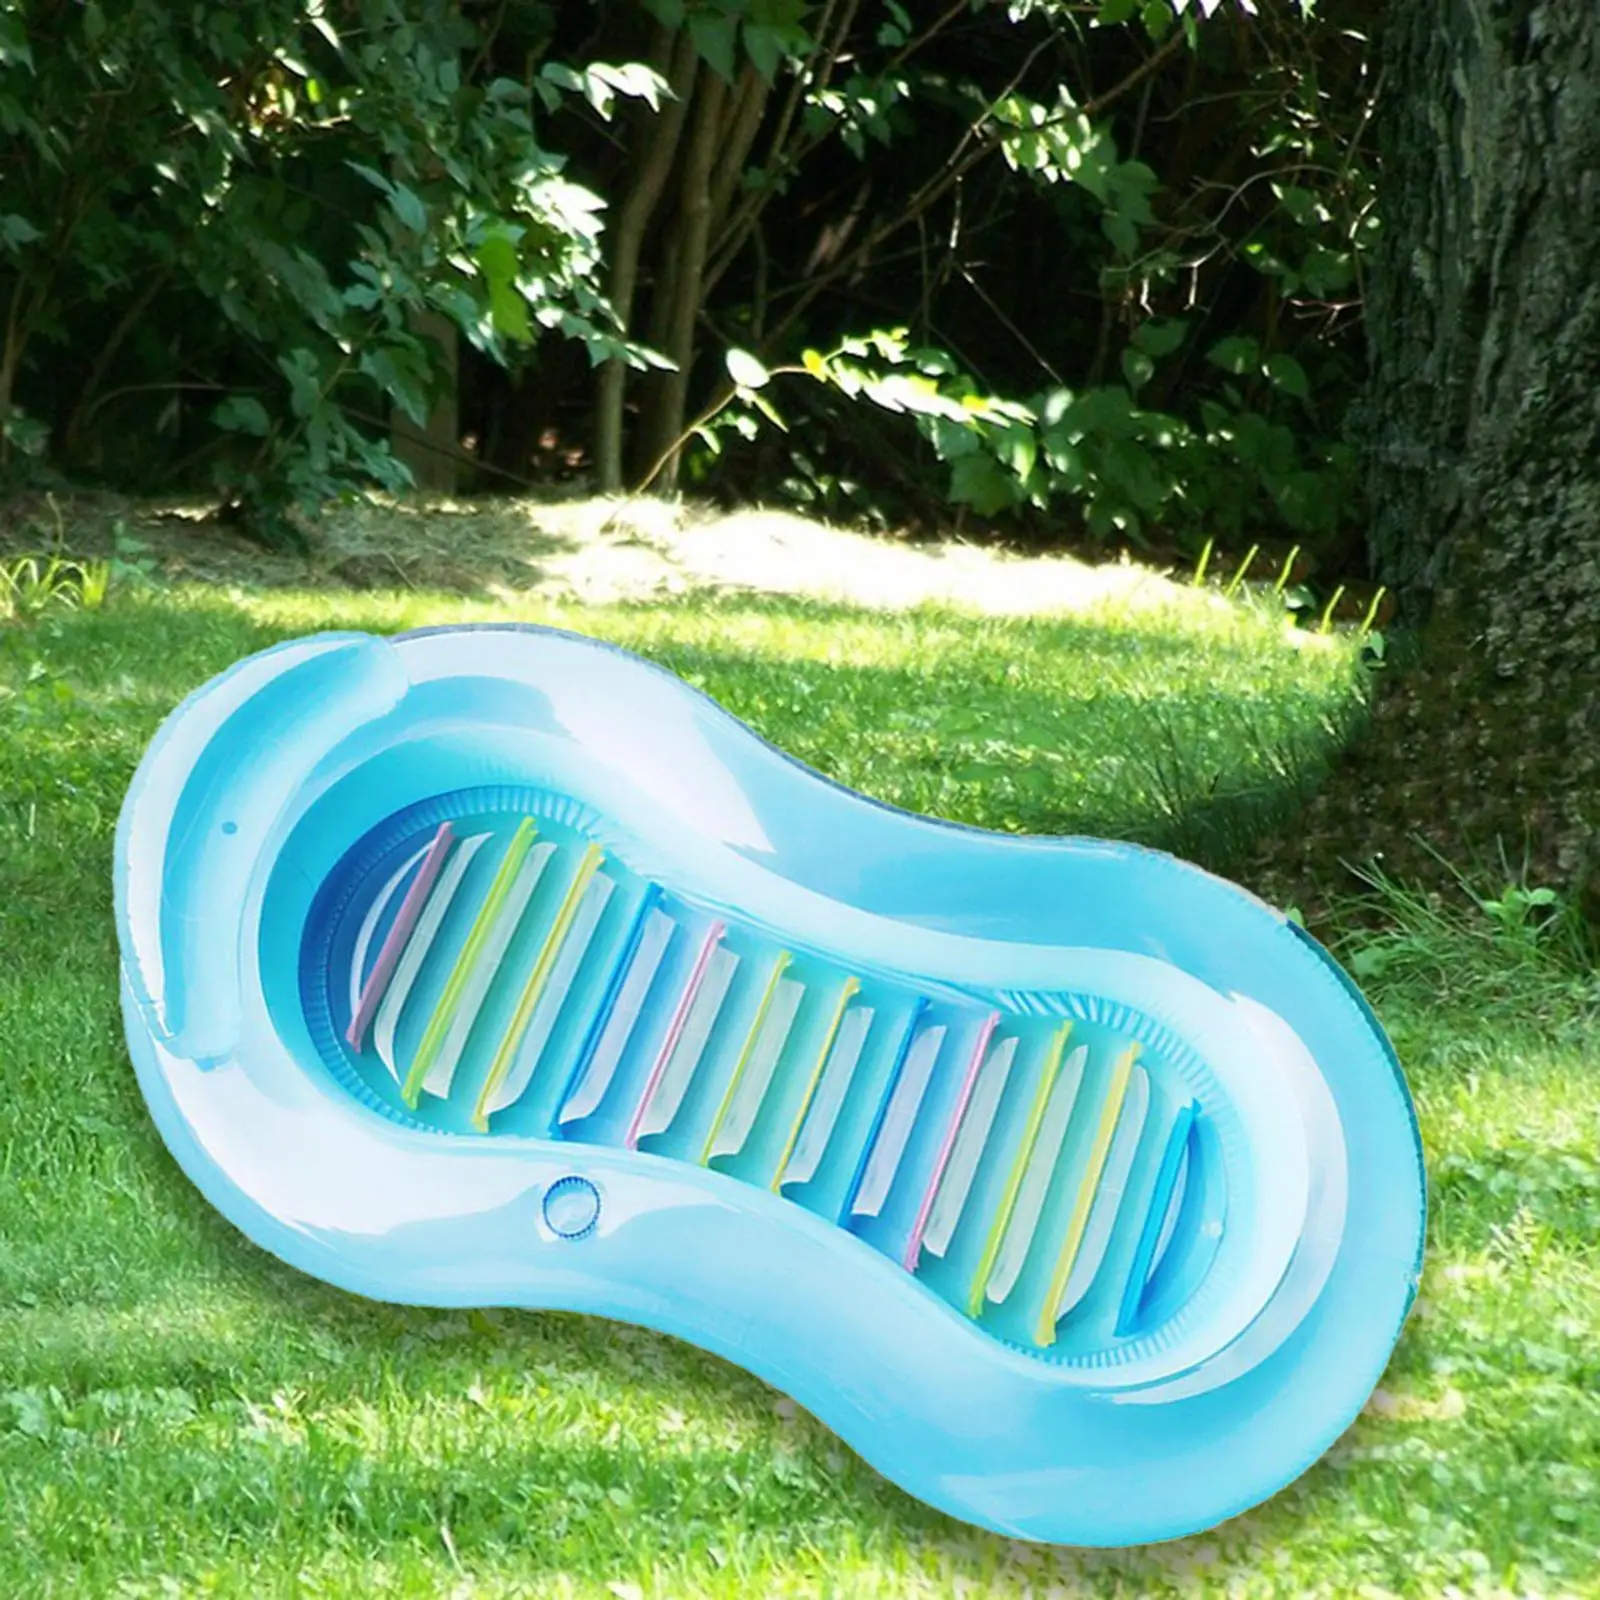 PVC Inflatable Hammock Pool Floats Lounge Water Mattress Mat Floating Rafts Pool Floats for Outdoor